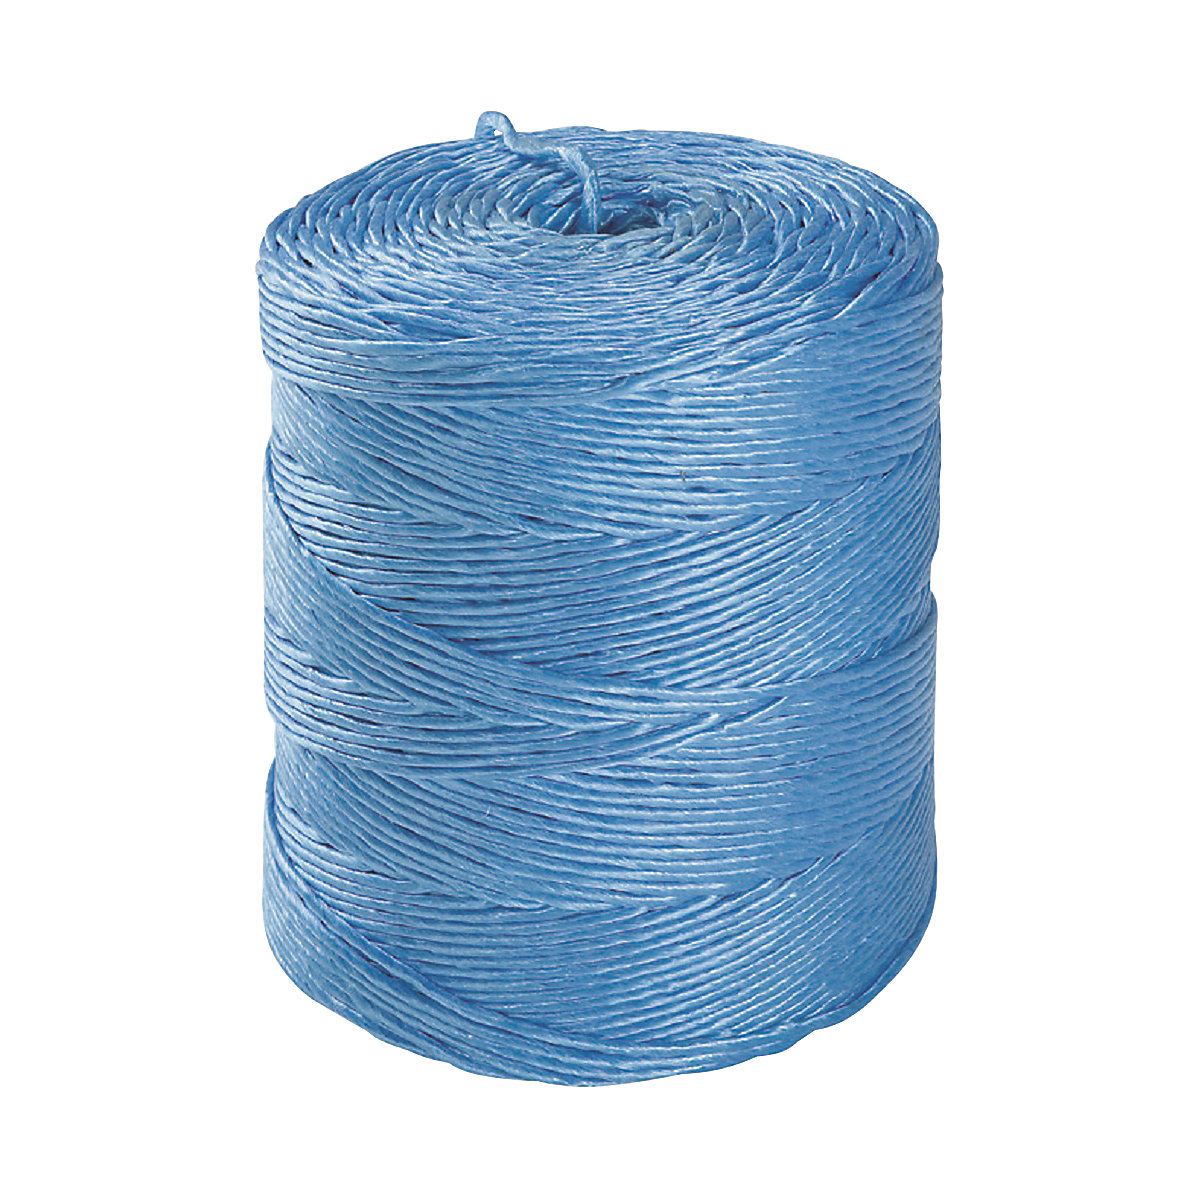 HSM – Strapping twine